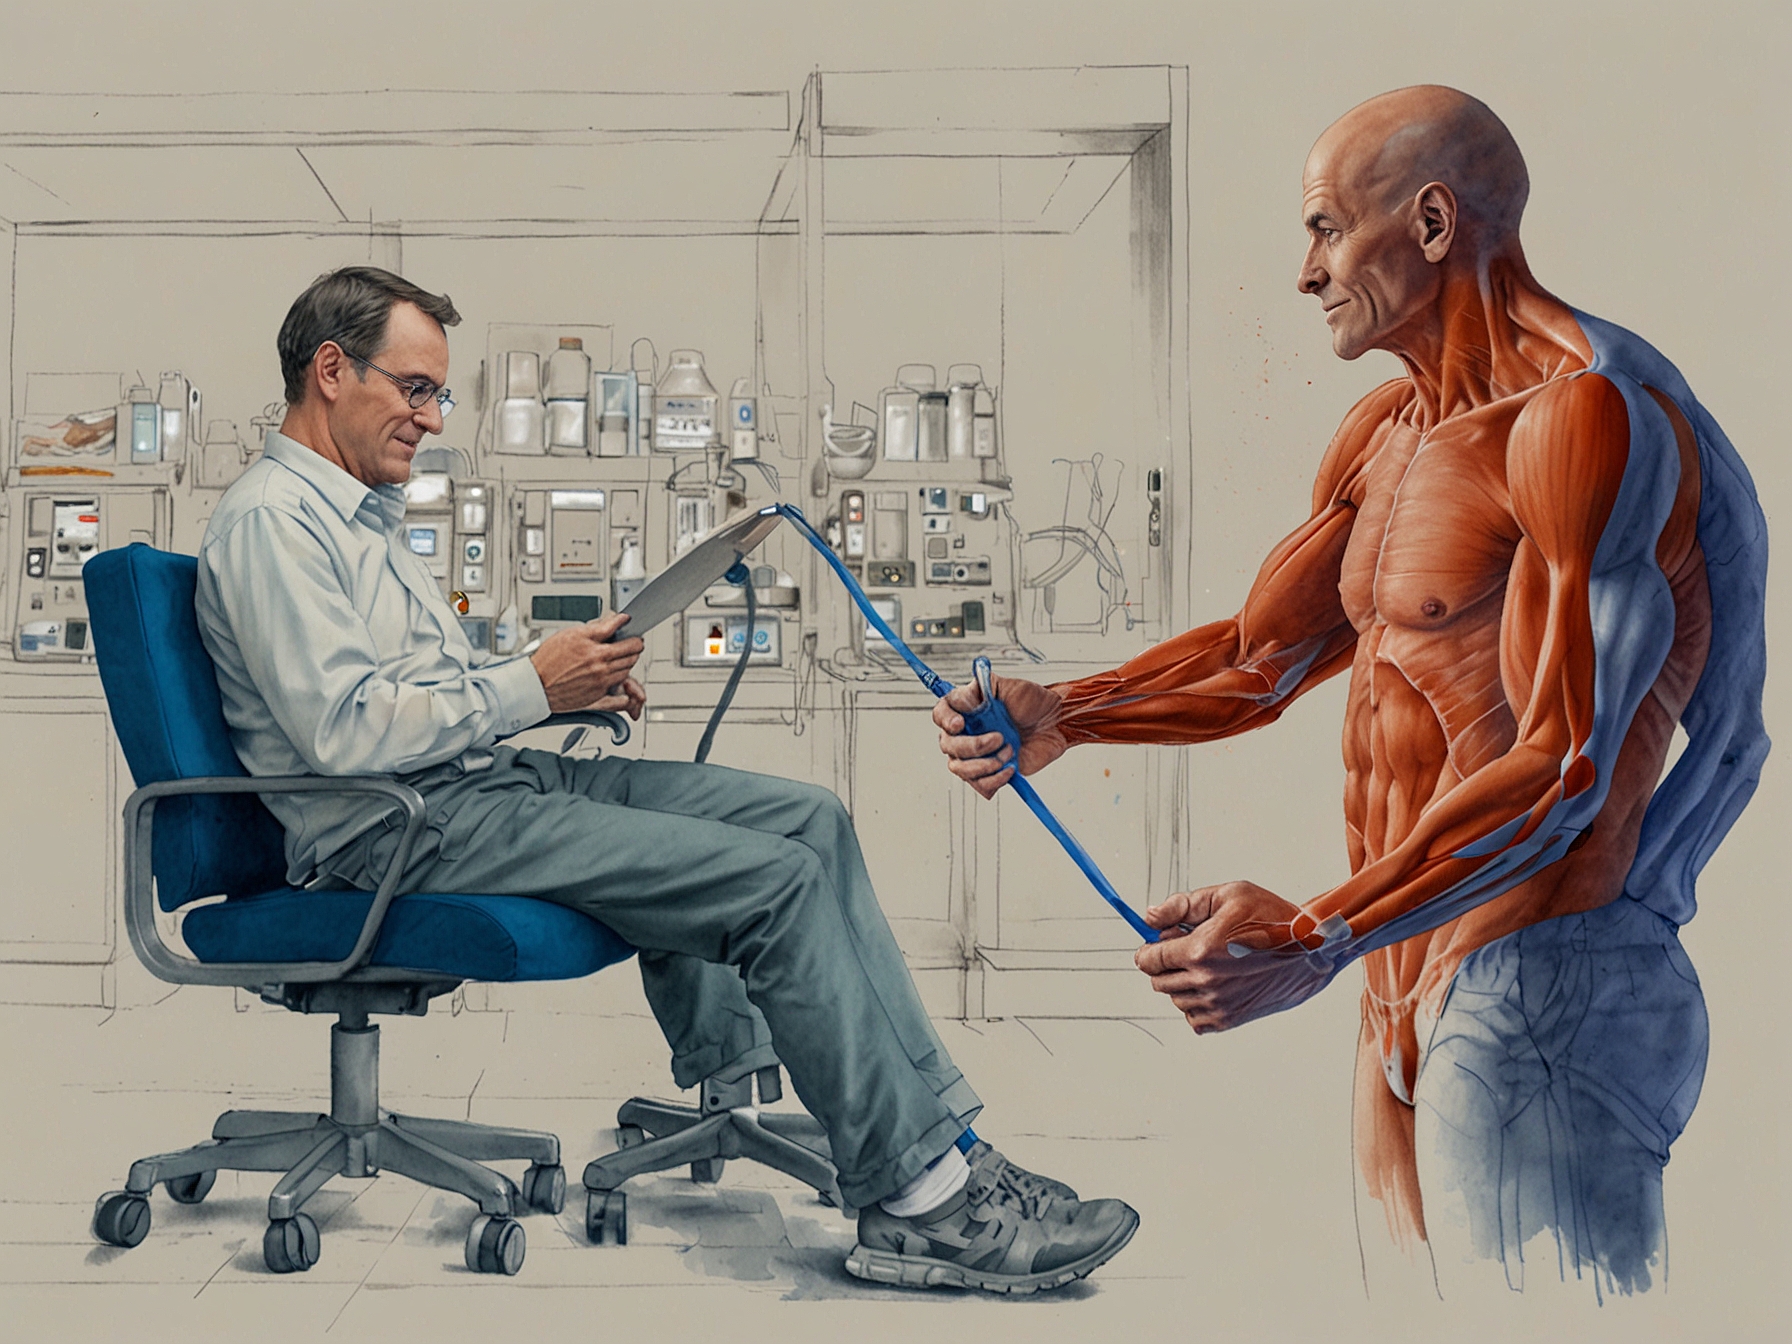 An illustration of Duchenne muscular dystrophy (DMD) exon-skipping therapy process, demonstrating how Sarepta's treatments aim to produce essential dystrophin protein for muscle function.